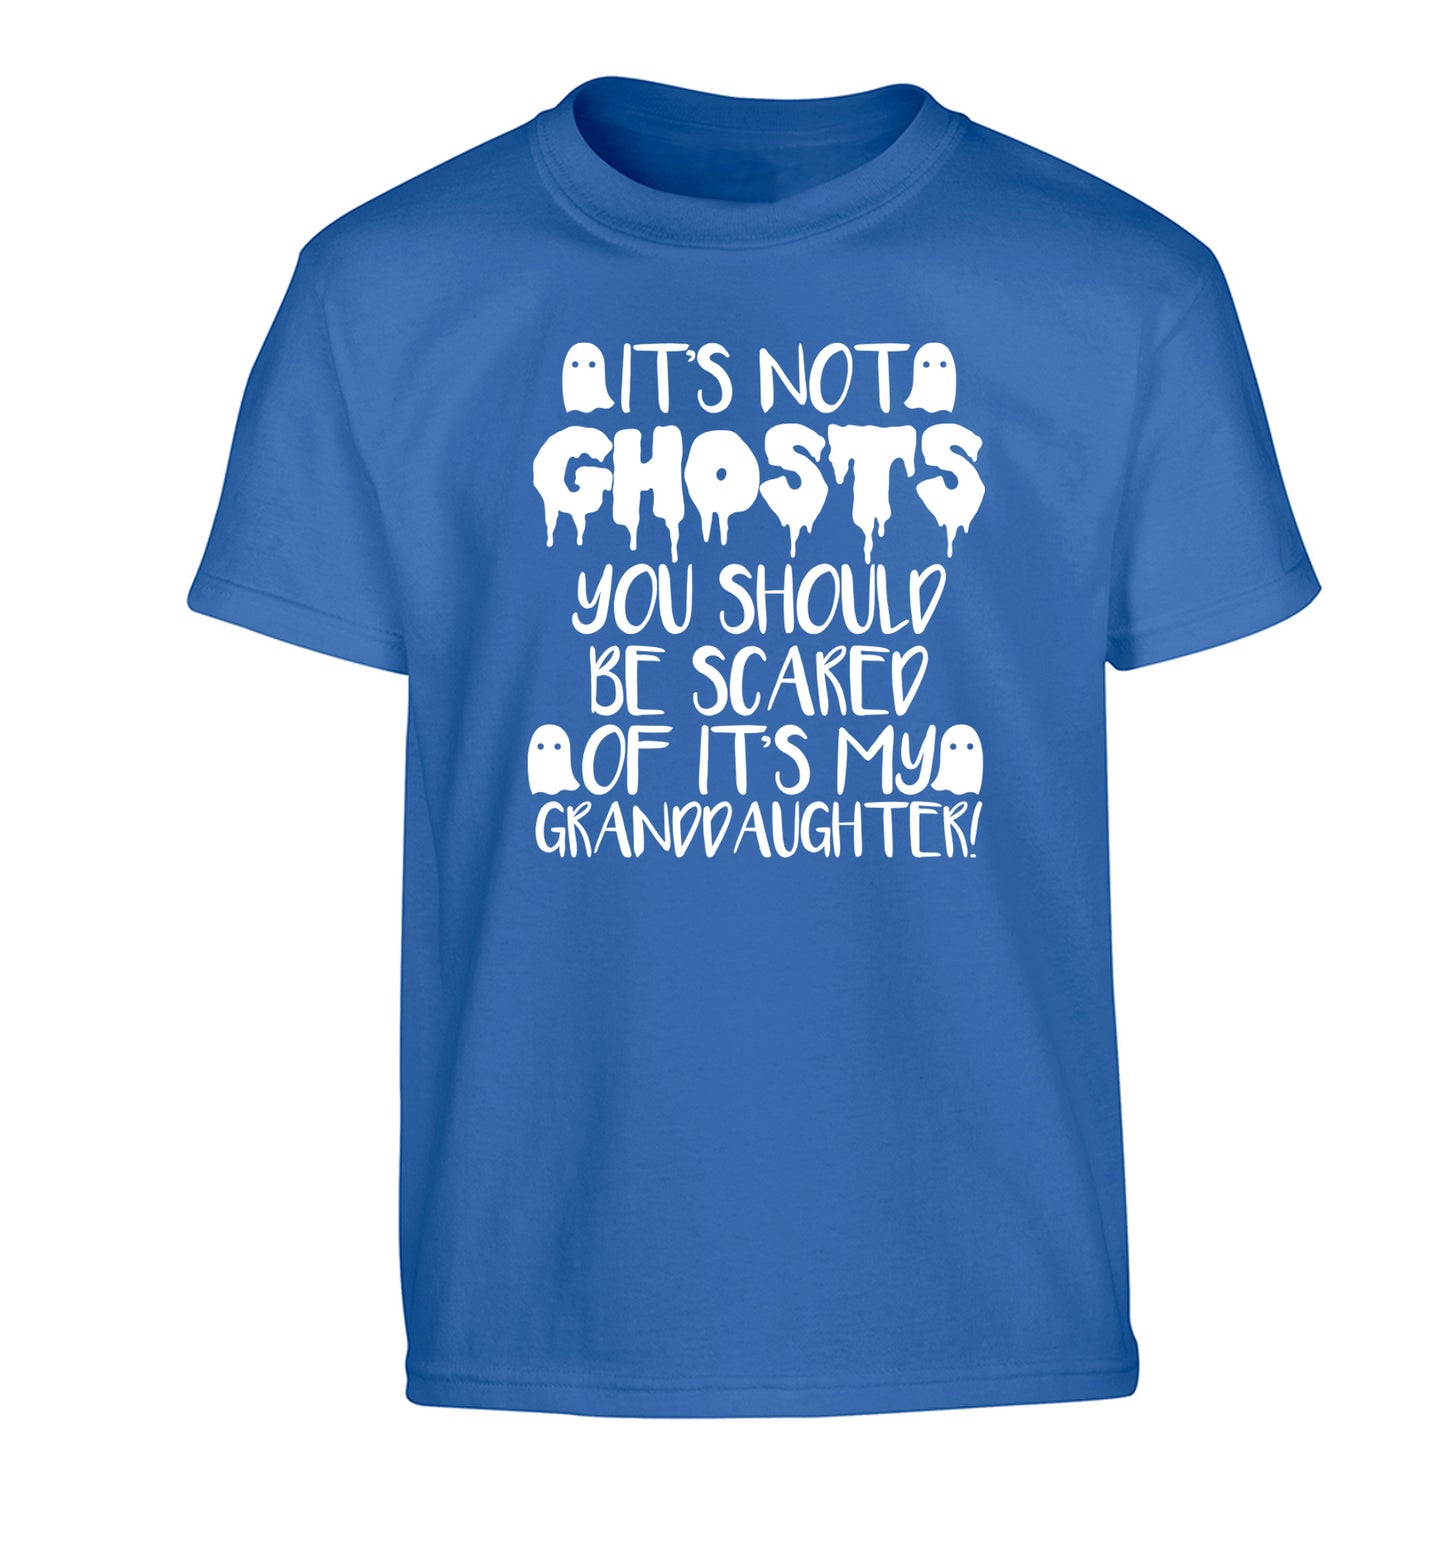 It's not ghosts you should be scared of it's my granddaughter! Children's blue Tshirt 12-14 Years